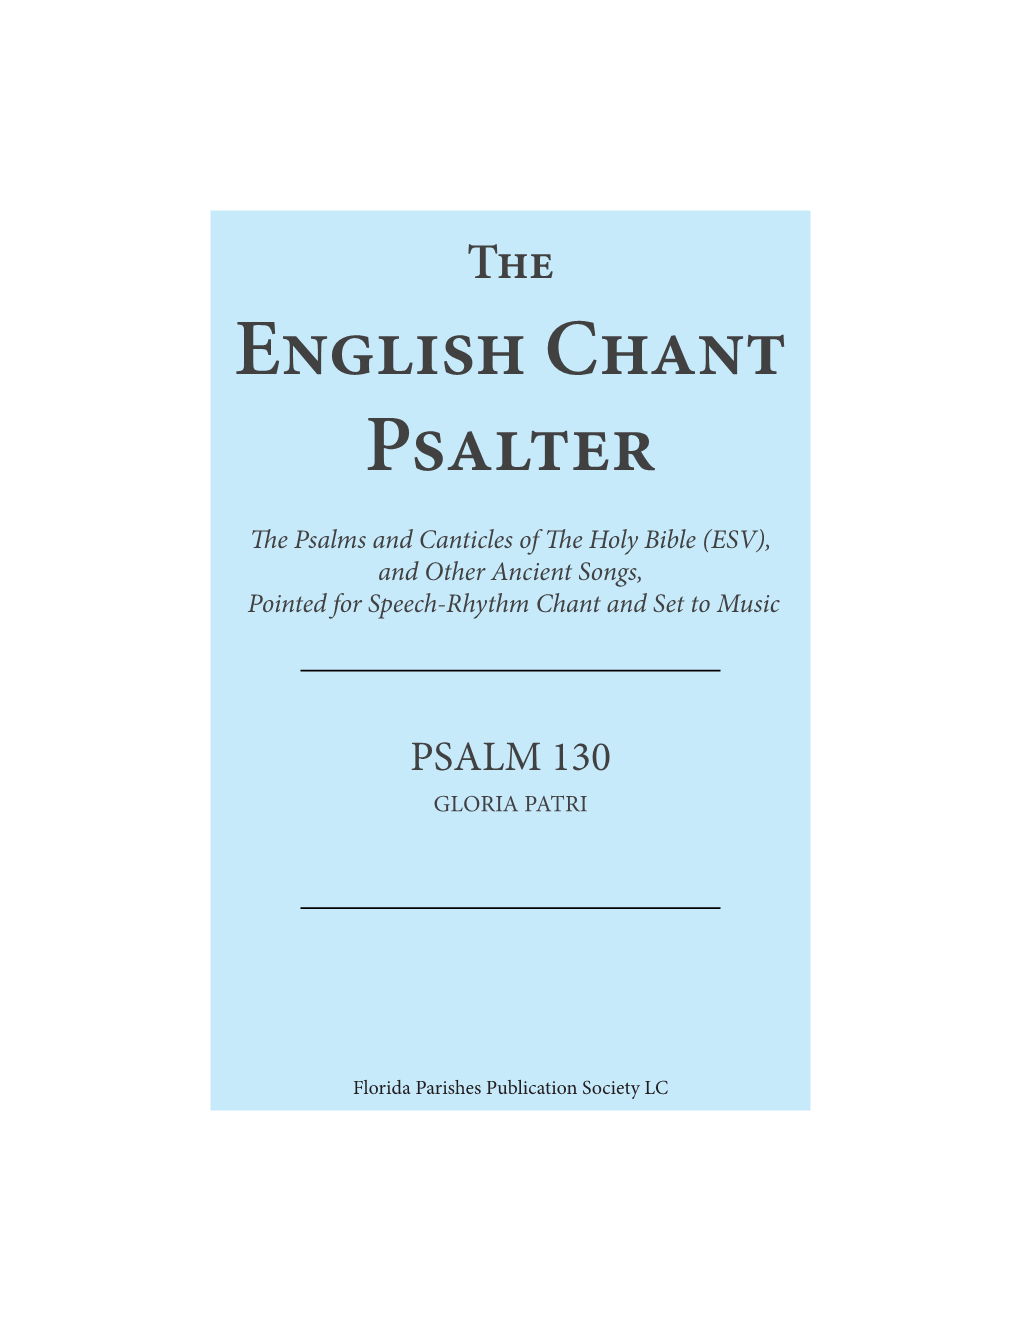 Psalms and Canticles of the Holy Bible (ESV), and Other Ancient Songs, Pointed for Speech-Rhythm Chant and Set to Music